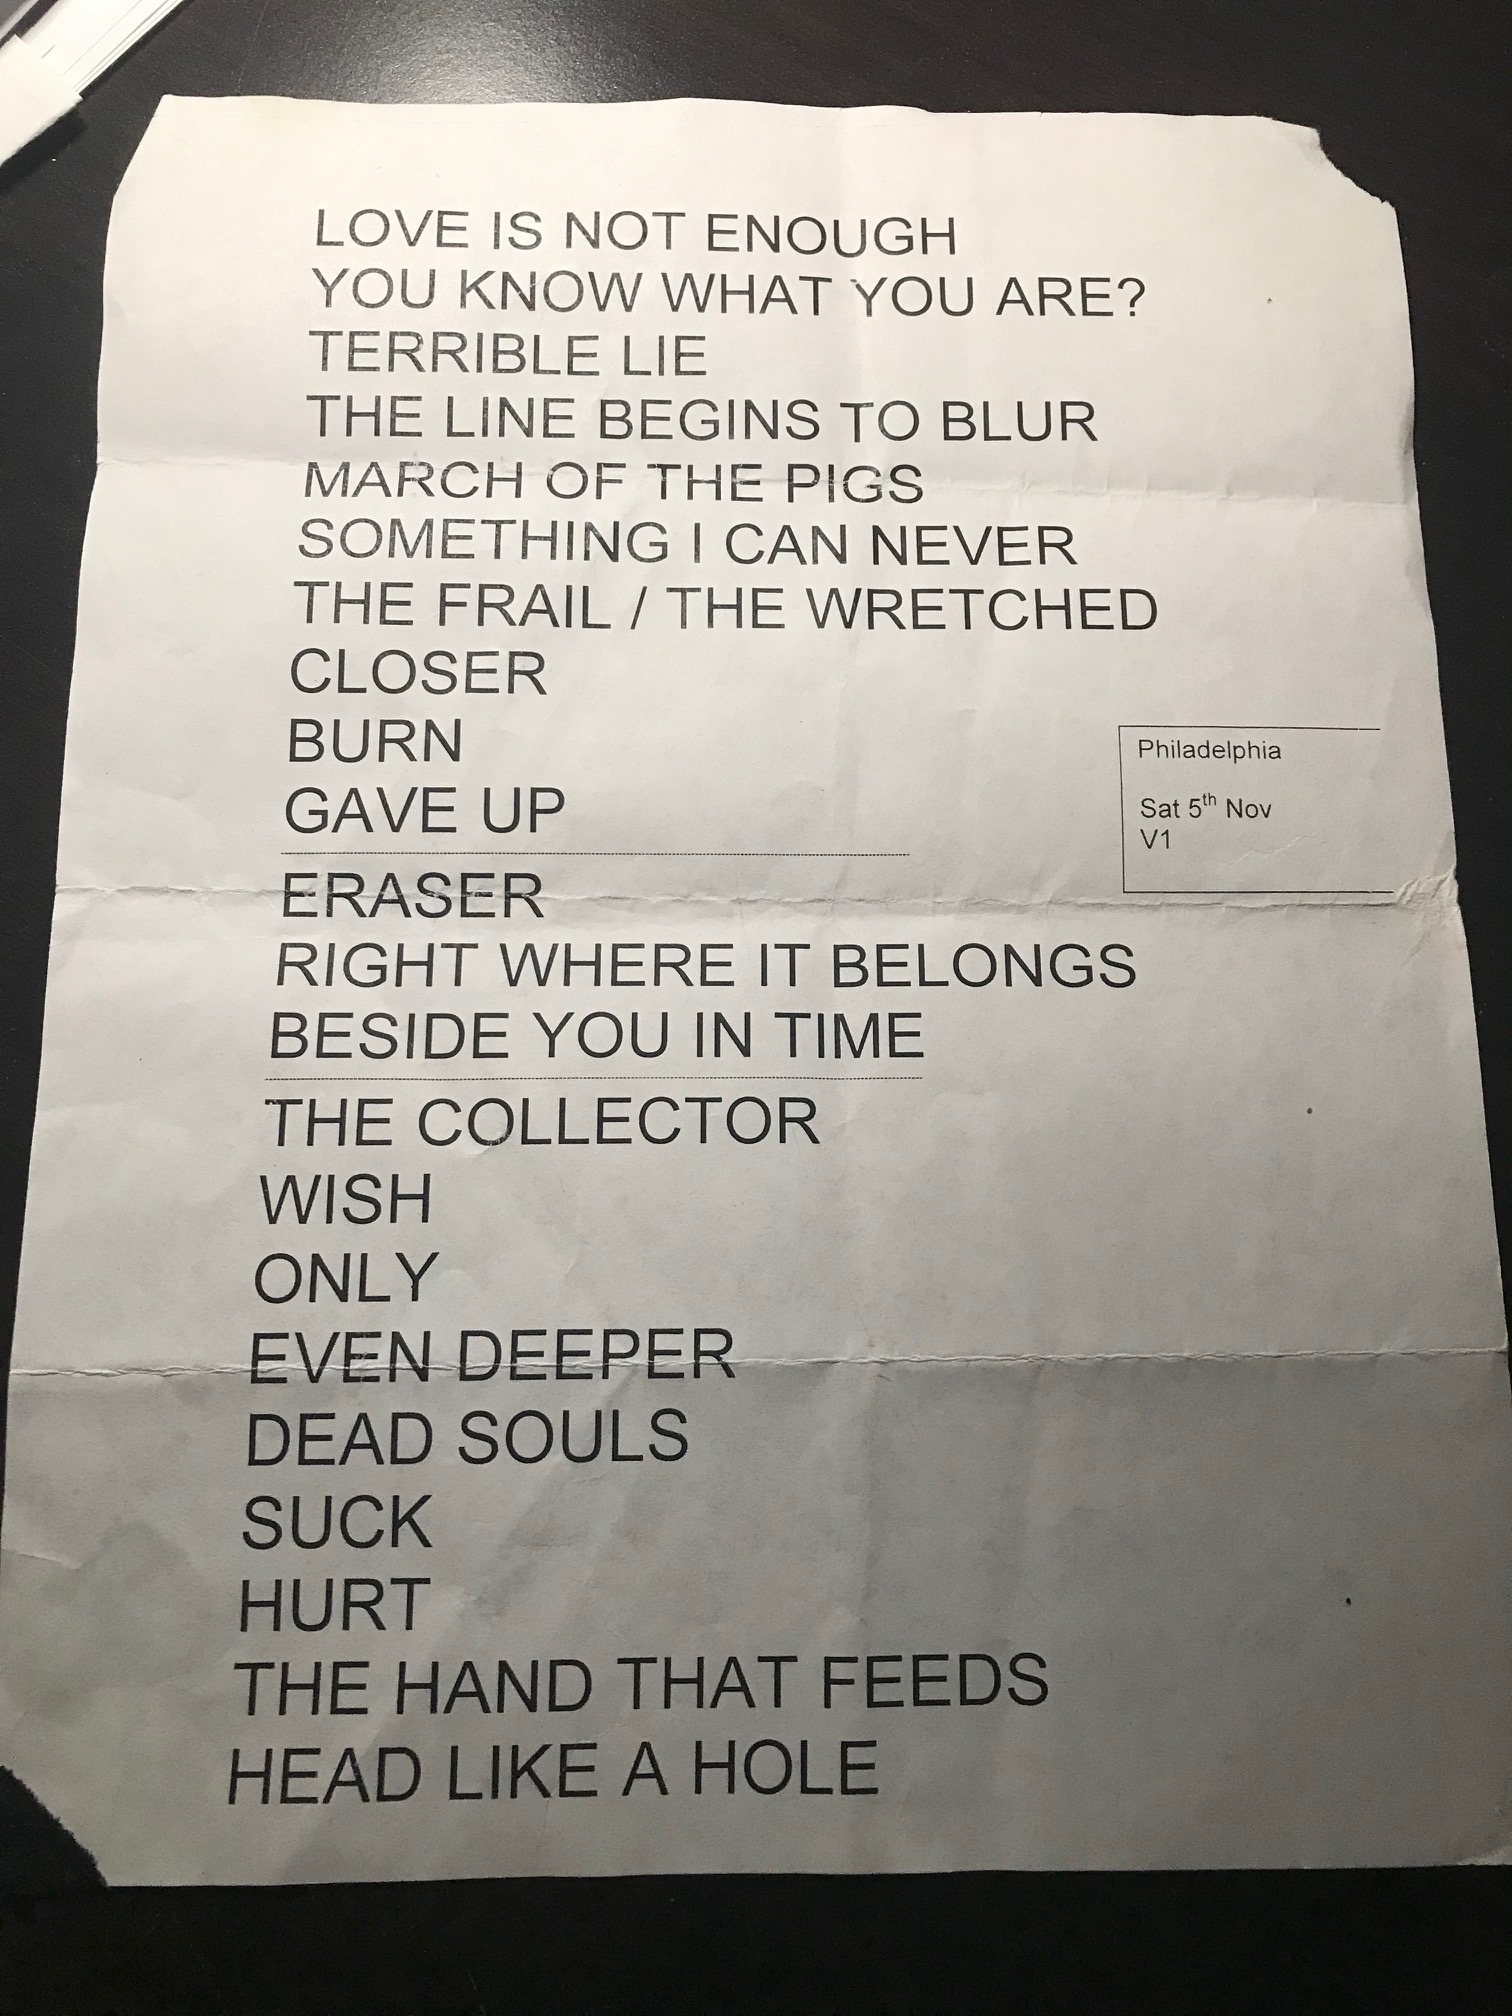 Philly fall 05 setlist